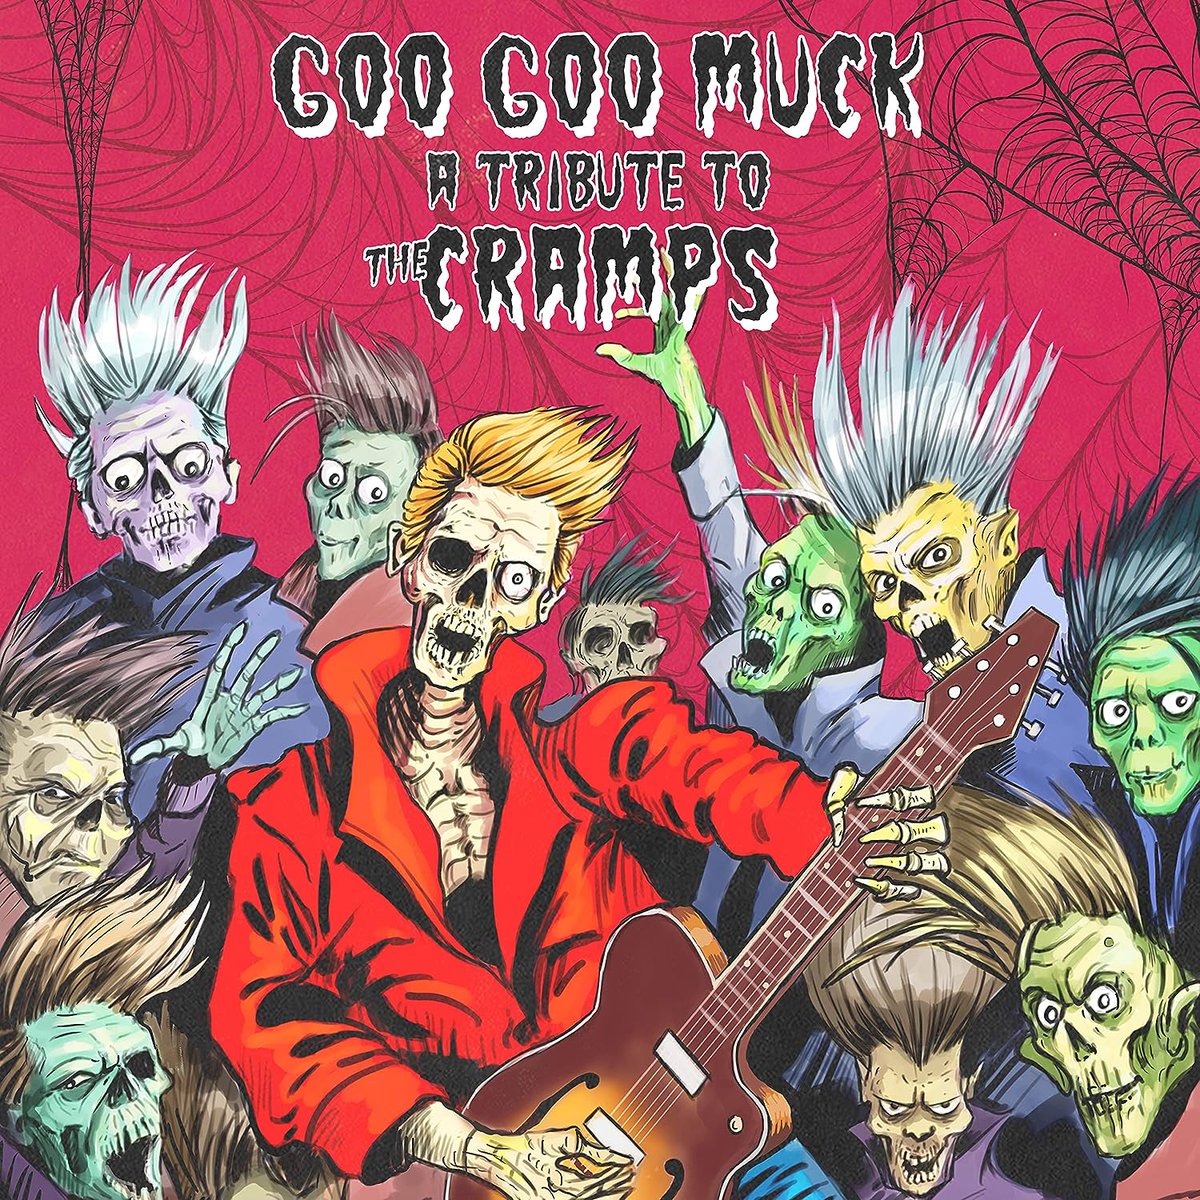 Goo Goo Muck, with contributions from Shooter Jennings, @69eyesofficial, @thenightbeats, Fuzztones and more, is a hair-raising rock and roll spectacle paying tribute to the legendary Cramps in inspired ways. @CleopatraRecord @Amped_Dist newreleasesnow.com/album/various-…